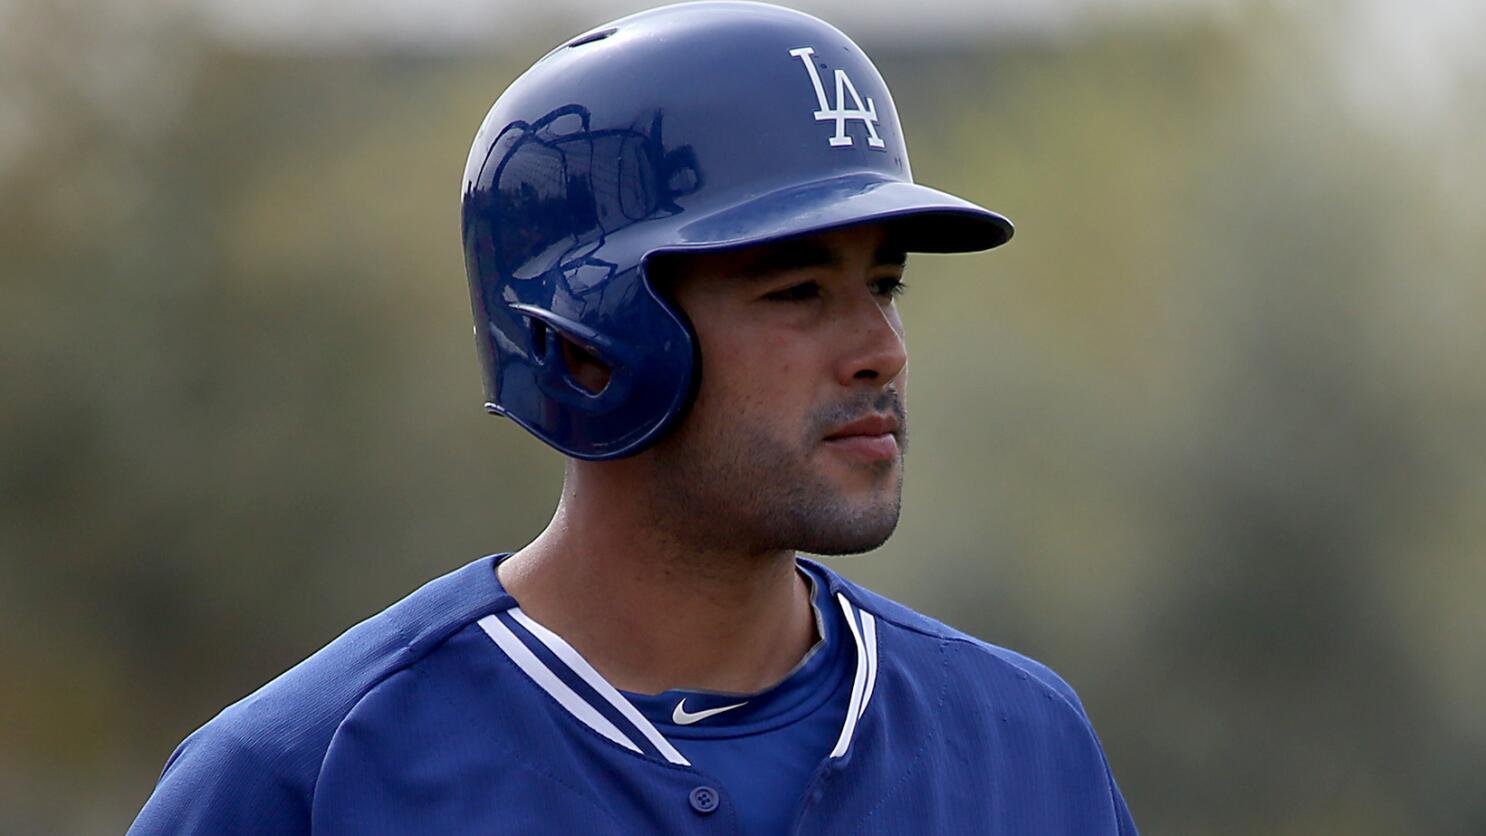 Andre Ethier is hoping for a starting job in Dodgers' crowded